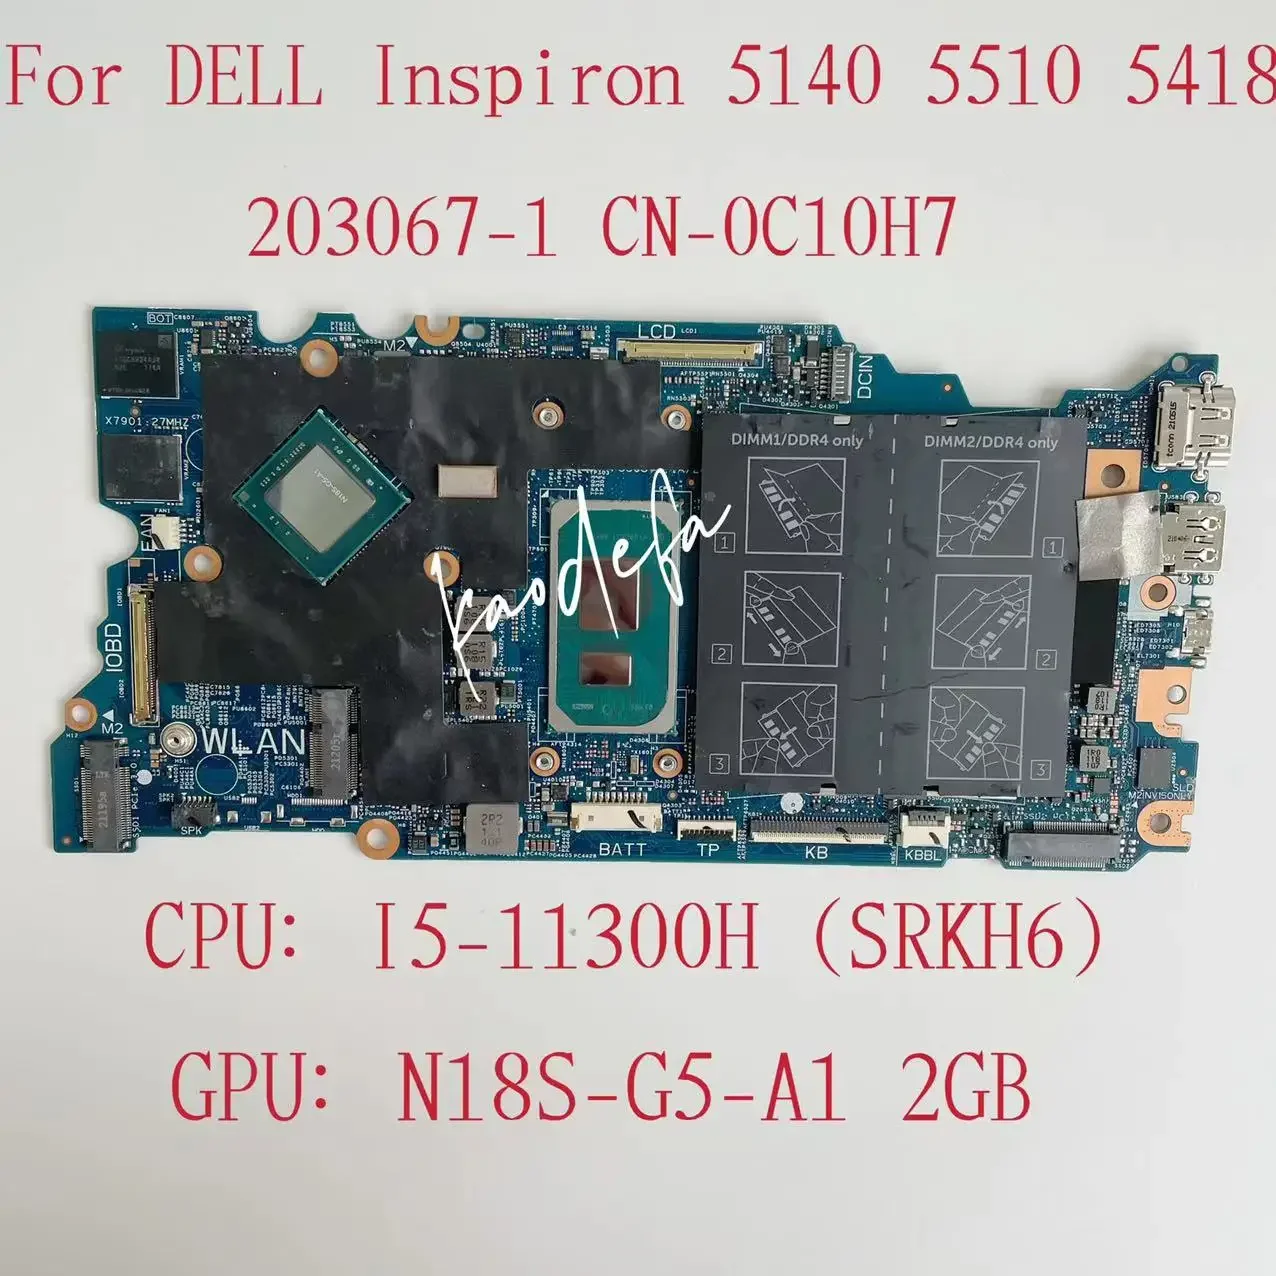 

For Dell Inspiron 14 5410 5418 5510 Laptop Motherboard CPU: I5-11300H SRKH6 GPU: N18S-G5-A1 2GB 203067-1 CN-0C10H7 0C10H7 C10H7